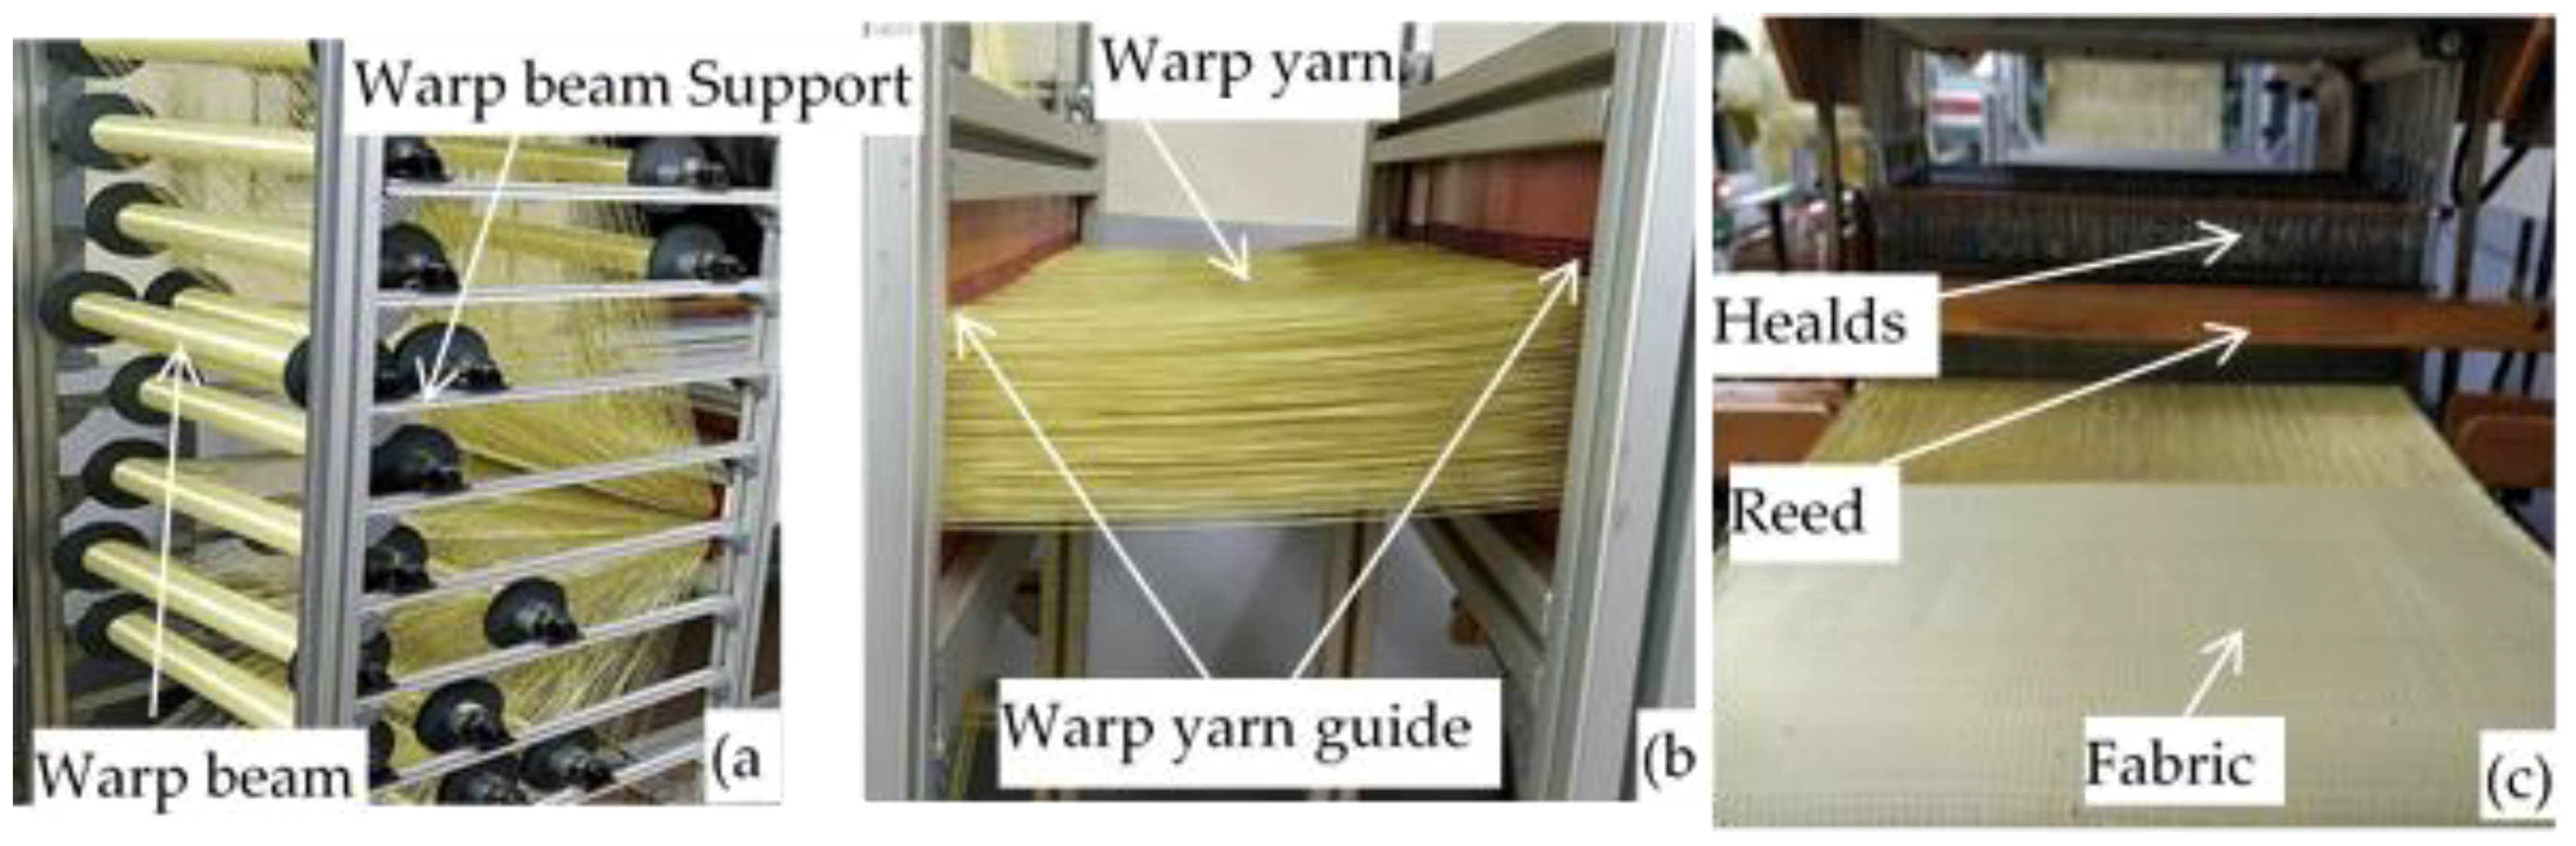 Applied Sciences Free Full Text Enhancing The Ballistic Performances Of 3d Warp Interlock Fabric Through Internal Structure As New Material For Seamless Female Soft Body Armor Development Html